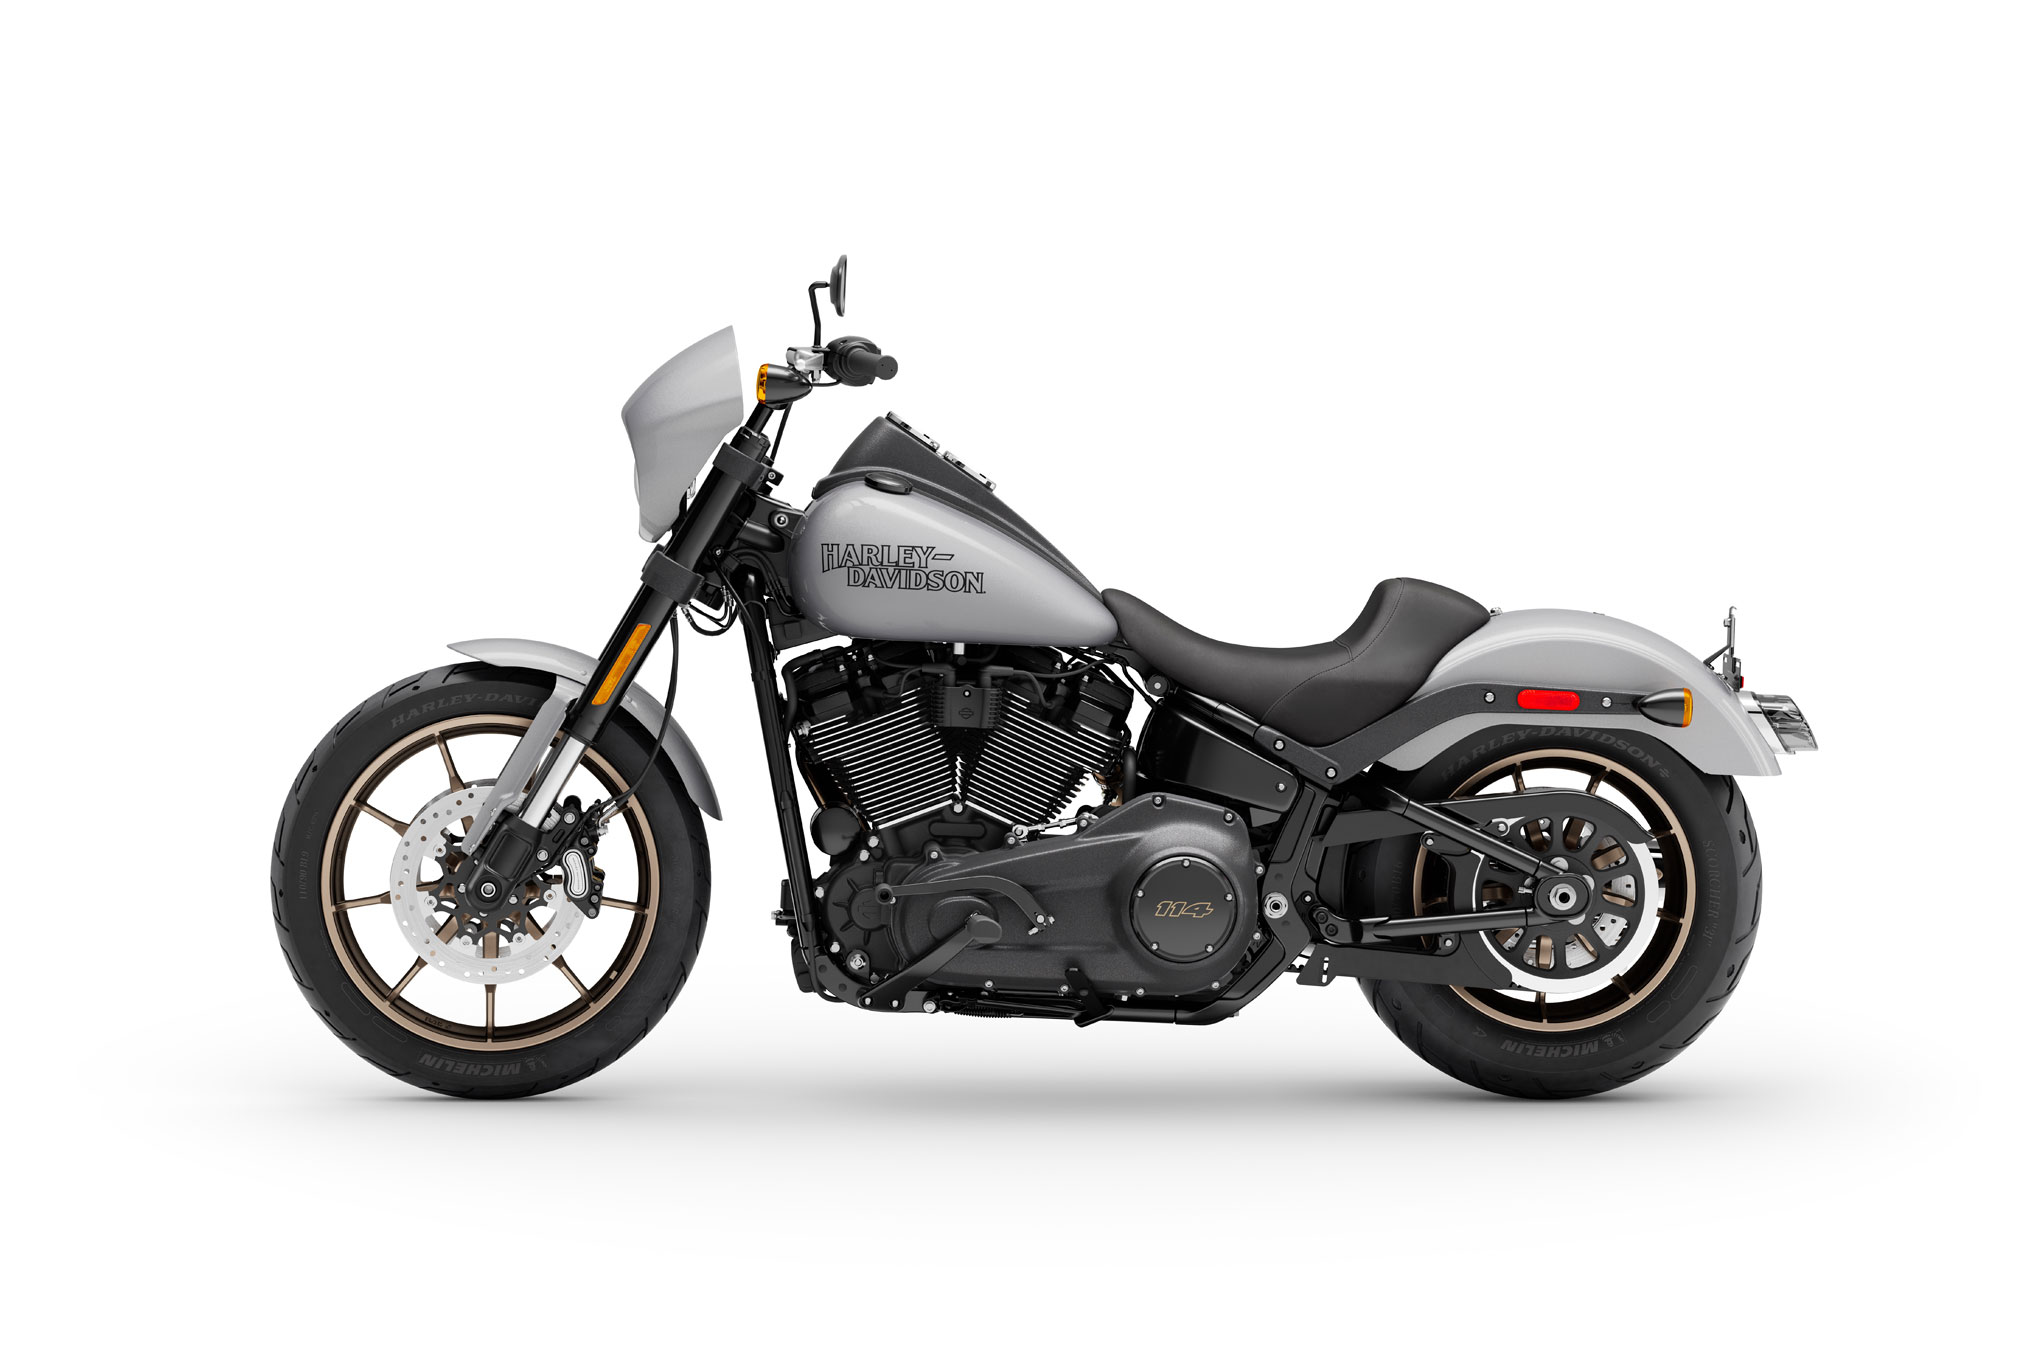 2020 Harley Davidson Low Rider S Guide Total Motorcycle